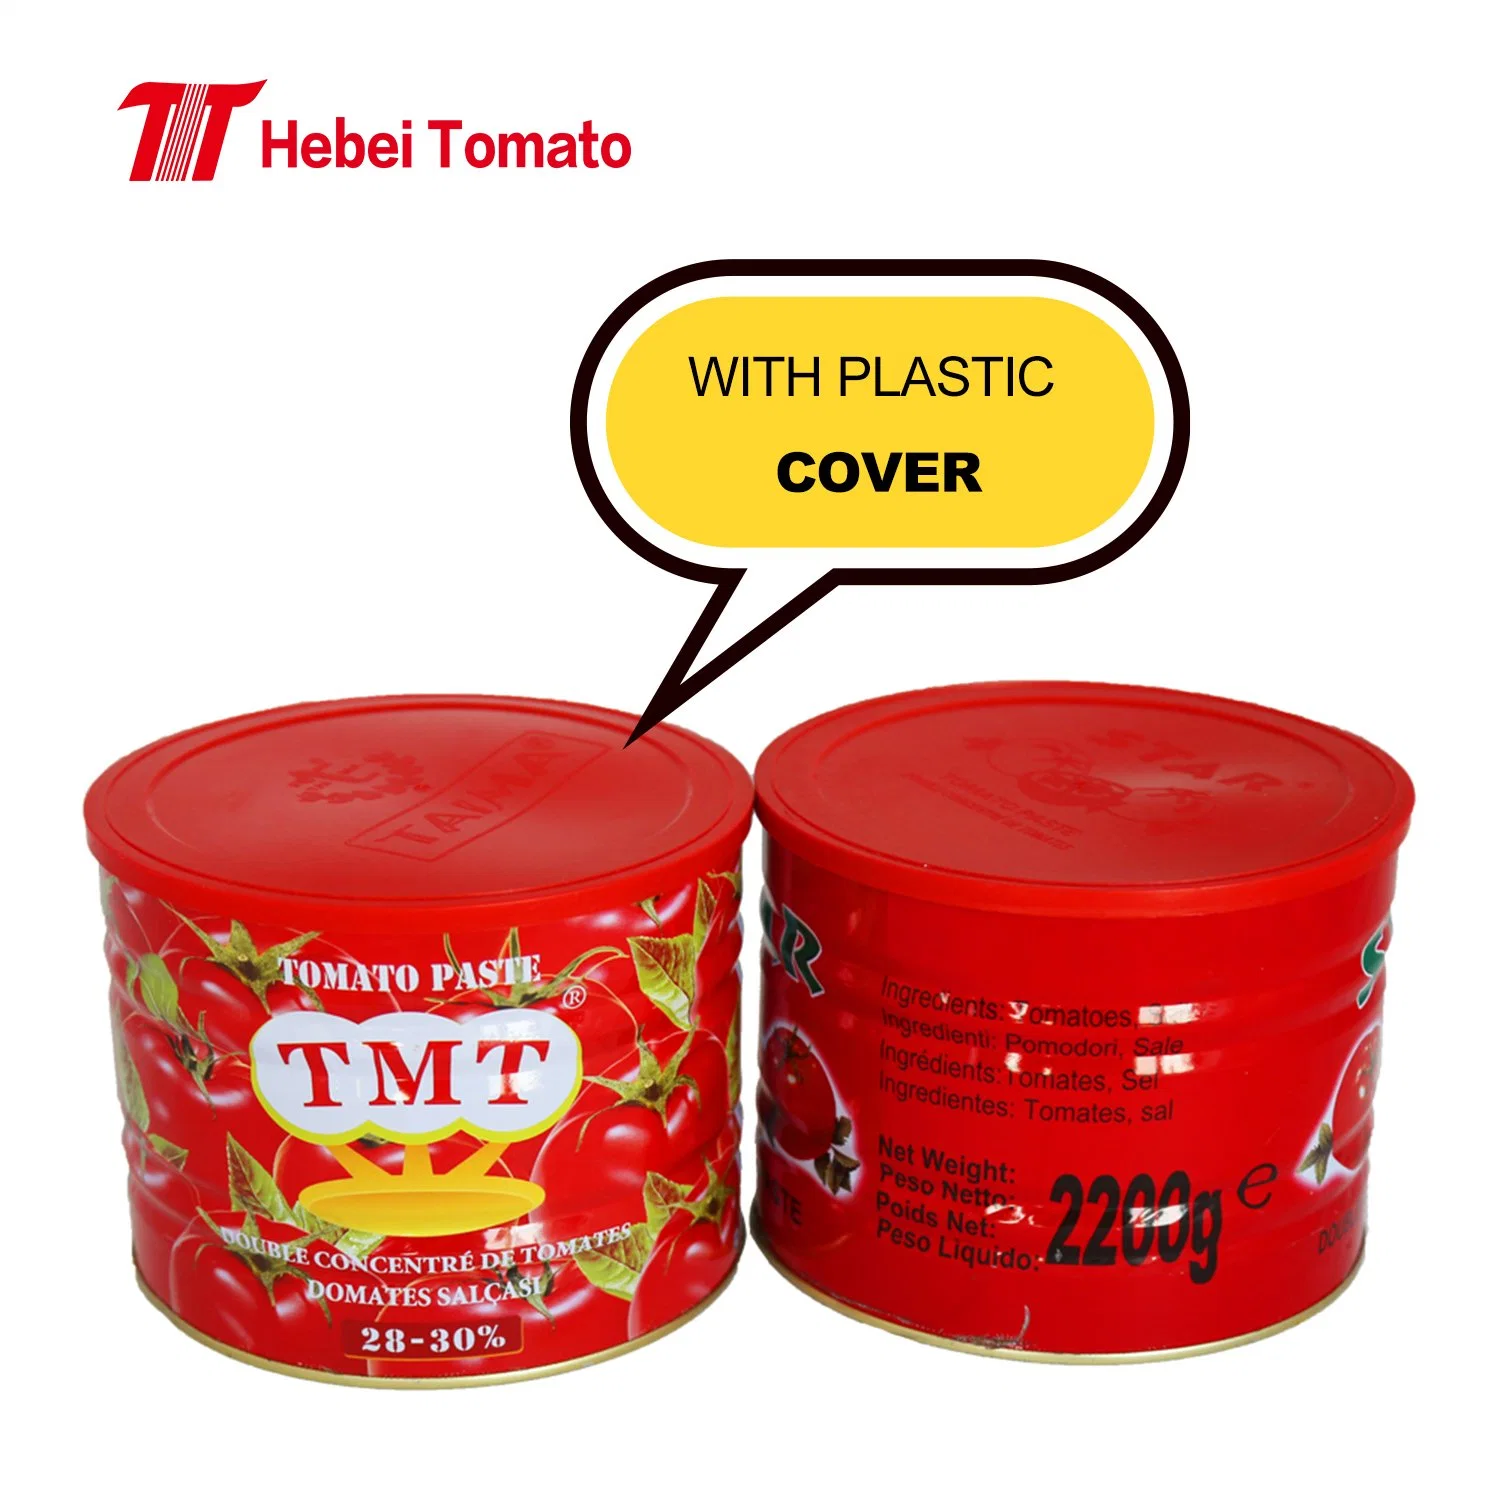 OEM Tomato Paste Buyers Double Concentrated Tomato Paste Ginny Brand for Africa Market